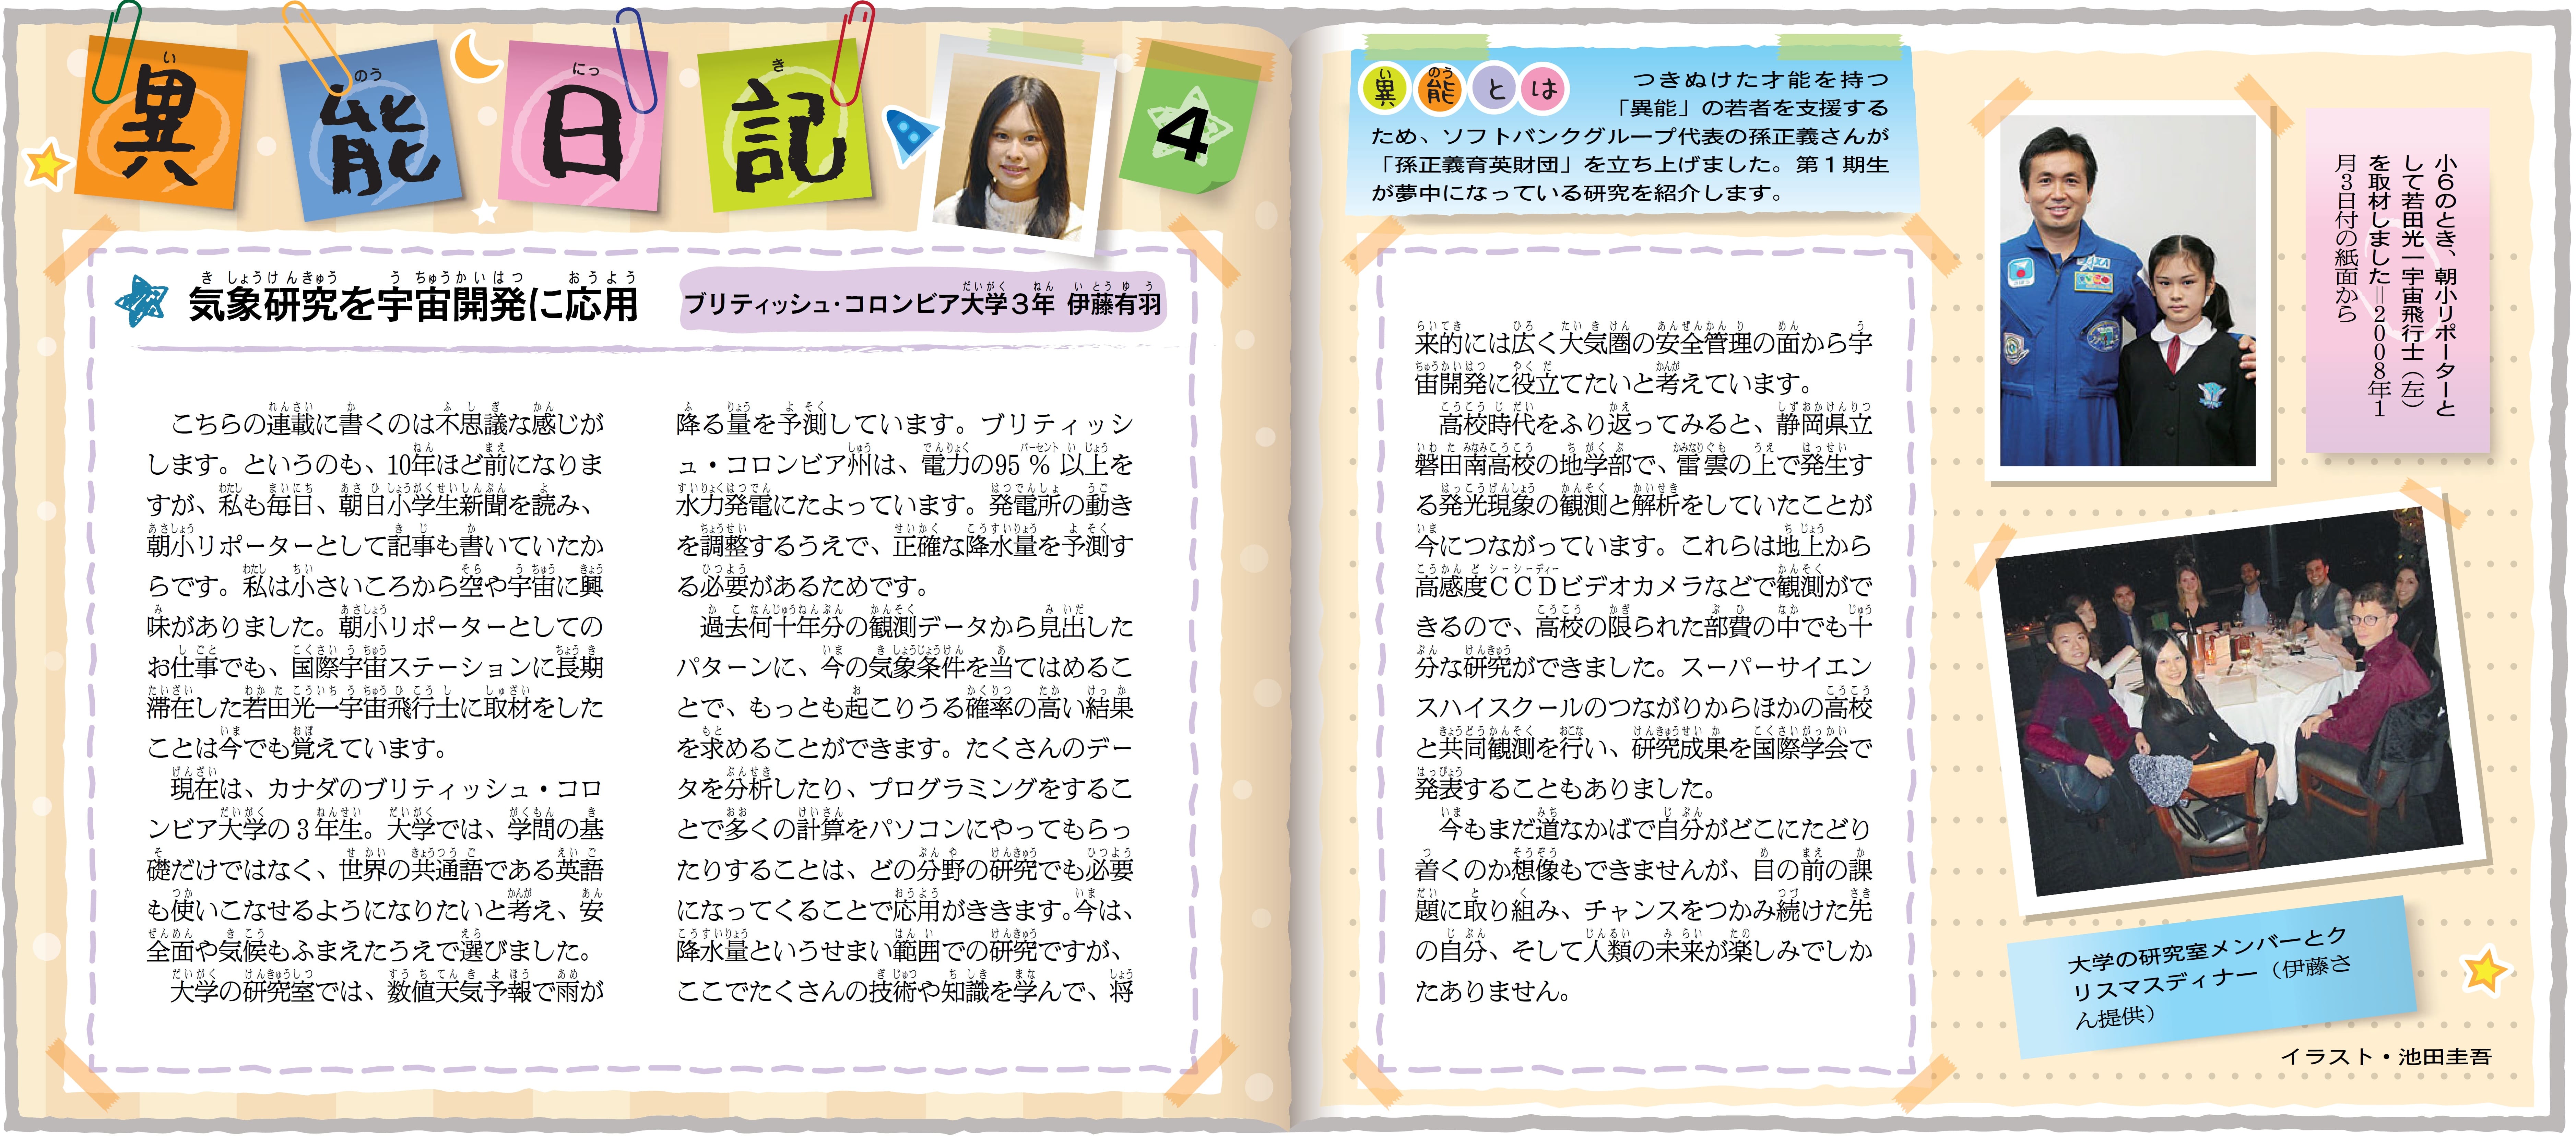 Diary Of Exceptional Talents Series Of Articles Contributed By Members Of The Foundation Appears In Asahi Shogakusei Shinbun Masason Foundation